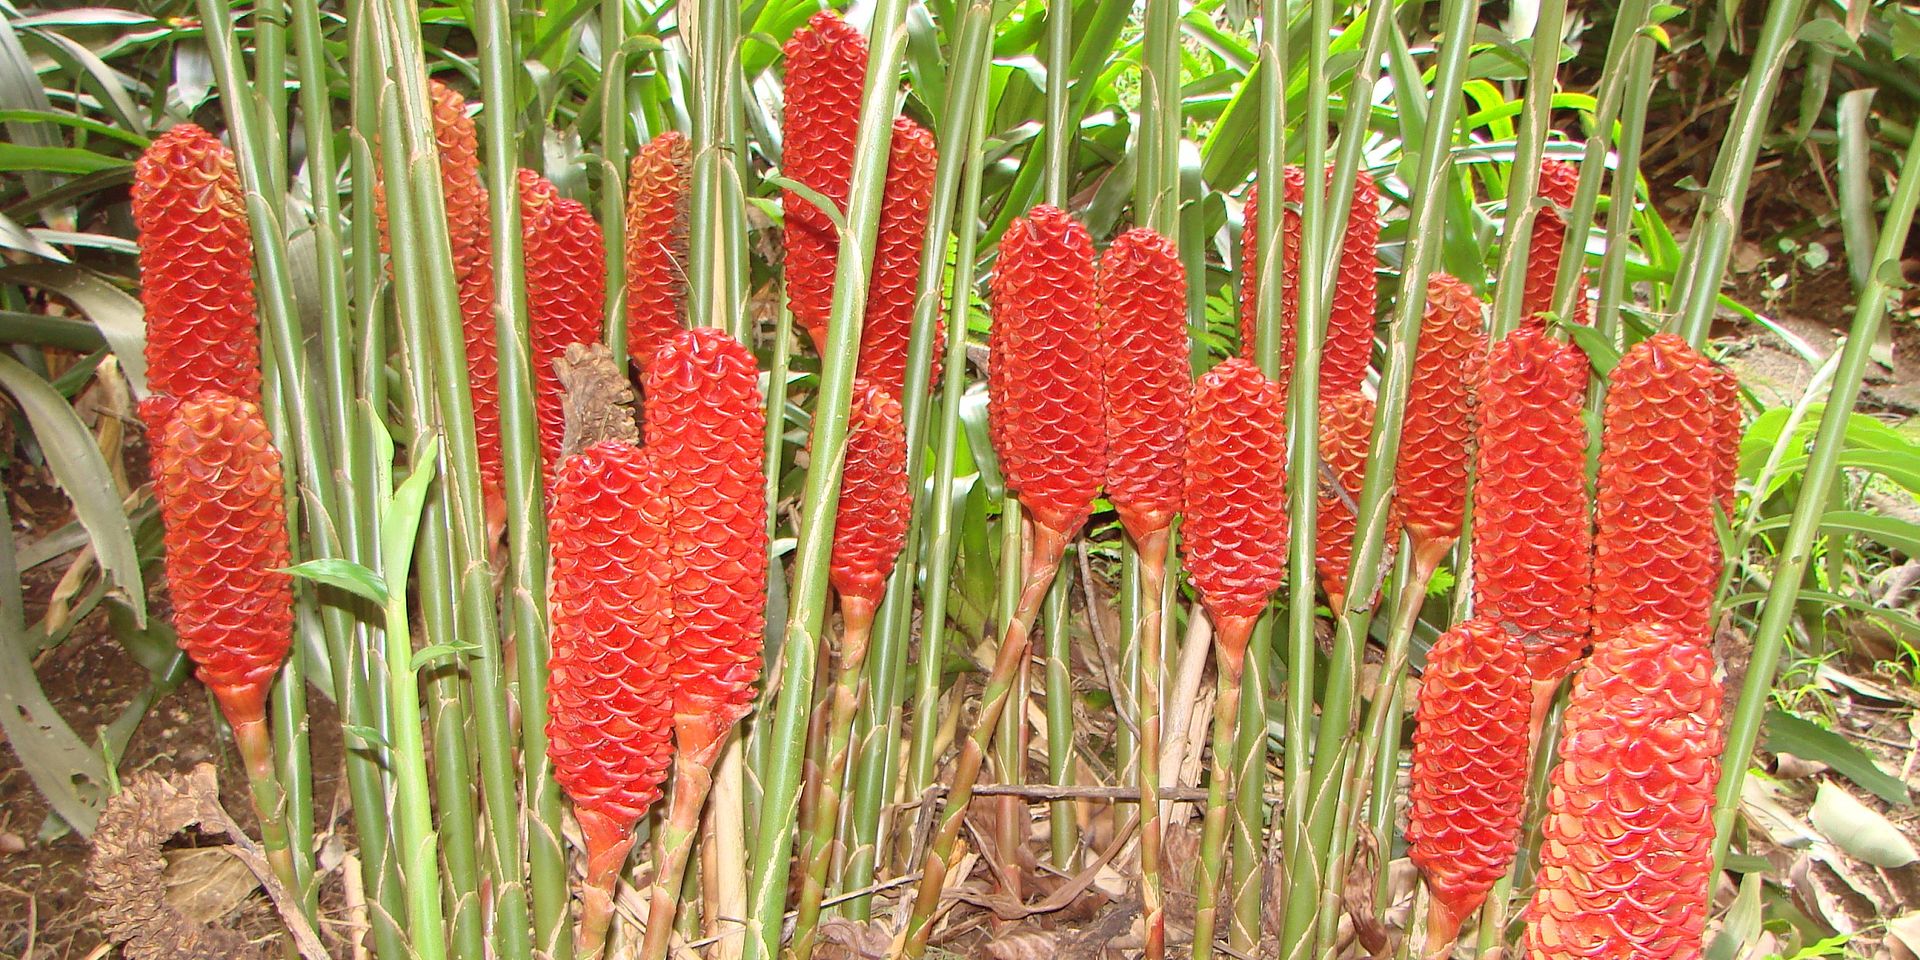 Zingiber spectable cones resembles the beehive.